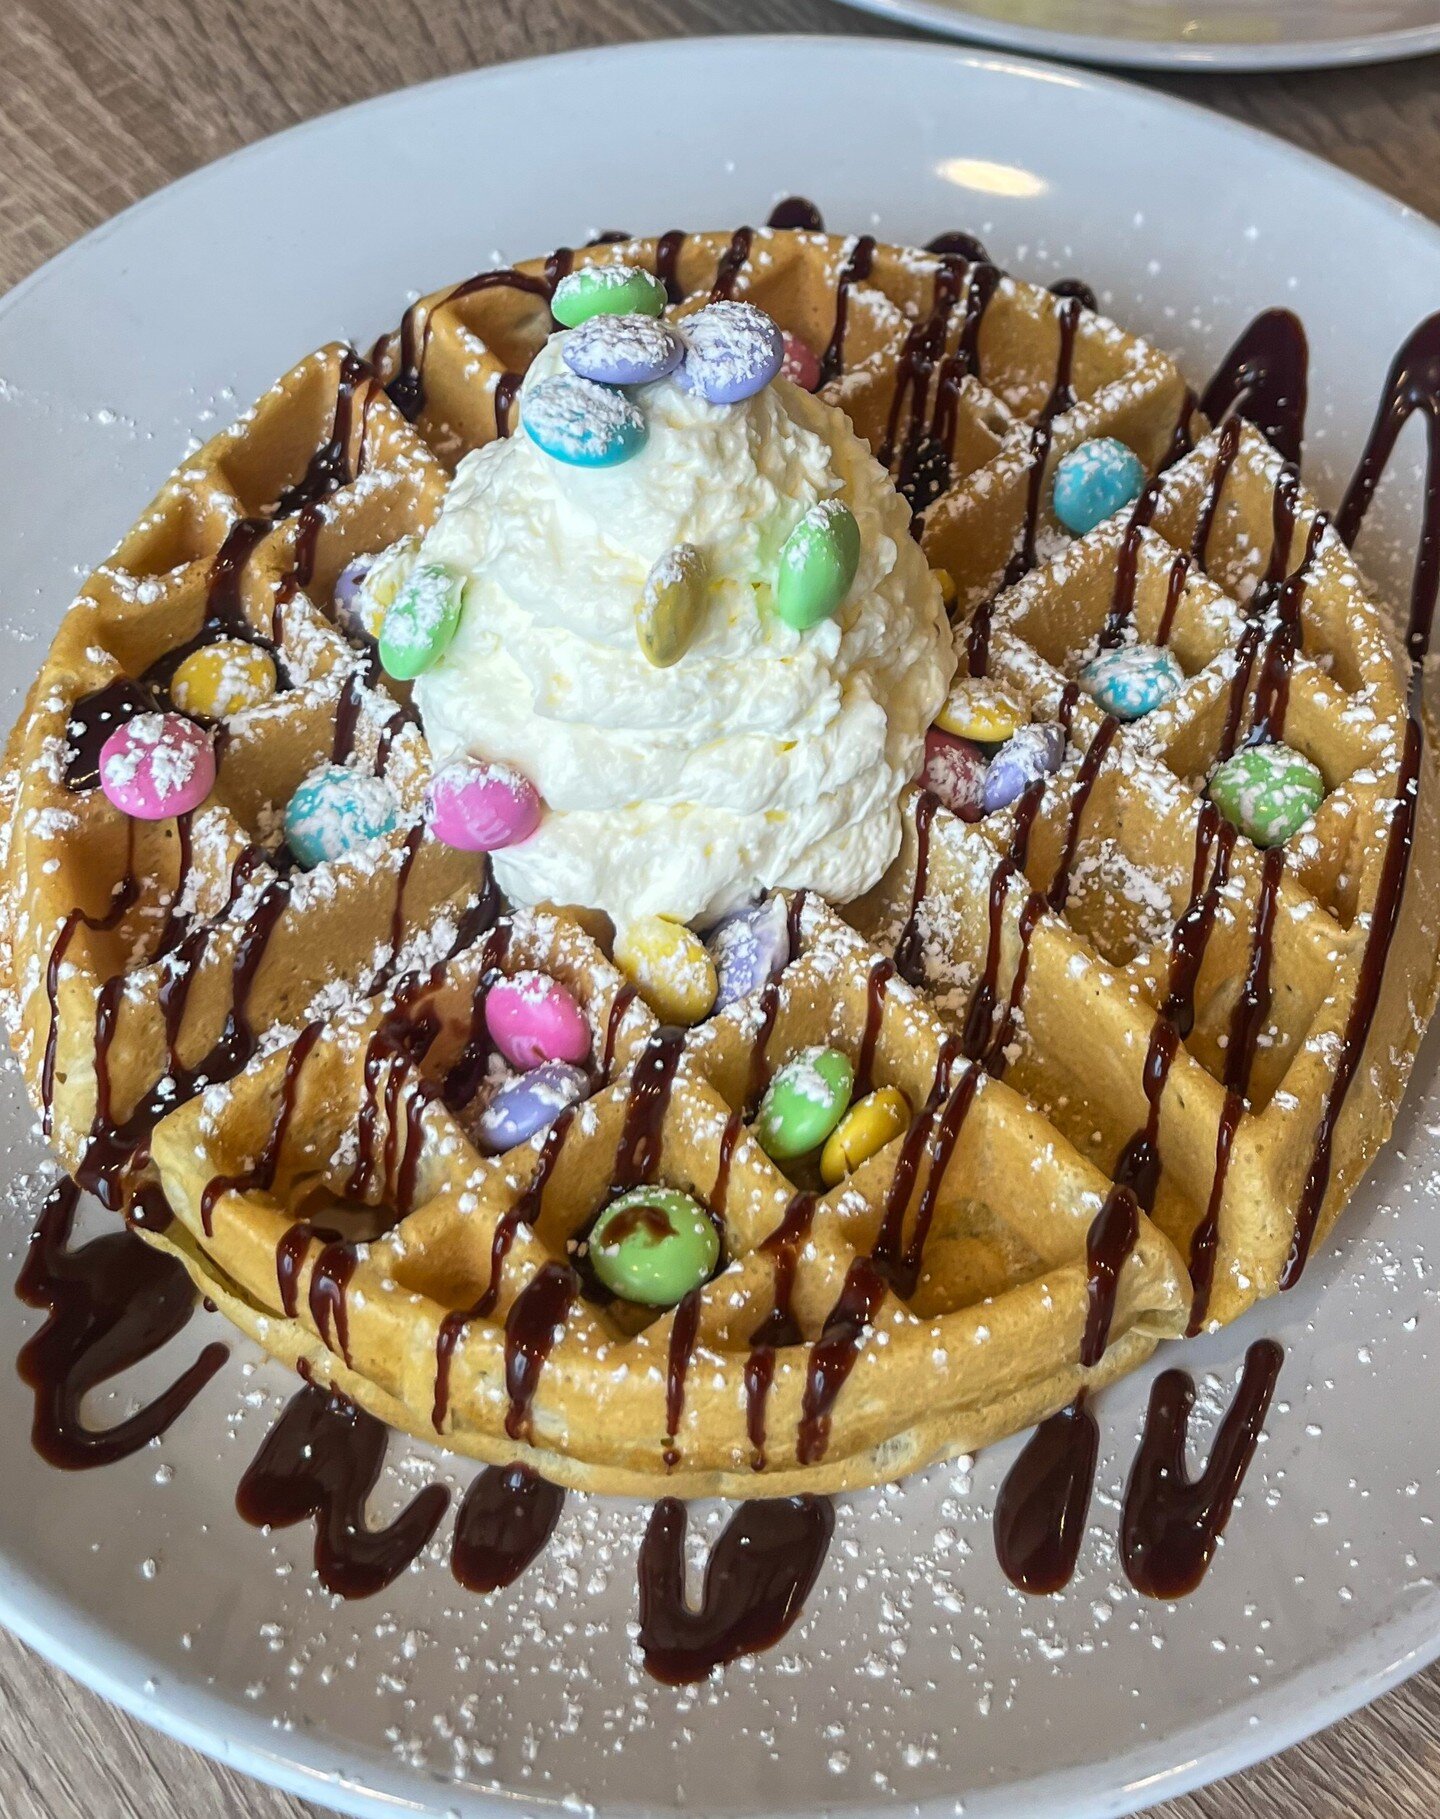 This weekend's specials!
🐣 Easter Egg Hunt Frittata - Diced ham, asparagus, red peppers, and cheddar cheese, served with homefries and toast

🐰 Cottontail Waffle - Buttermilk waffle, topped with whipped cream, a chocolate drizzle and Easter candy

